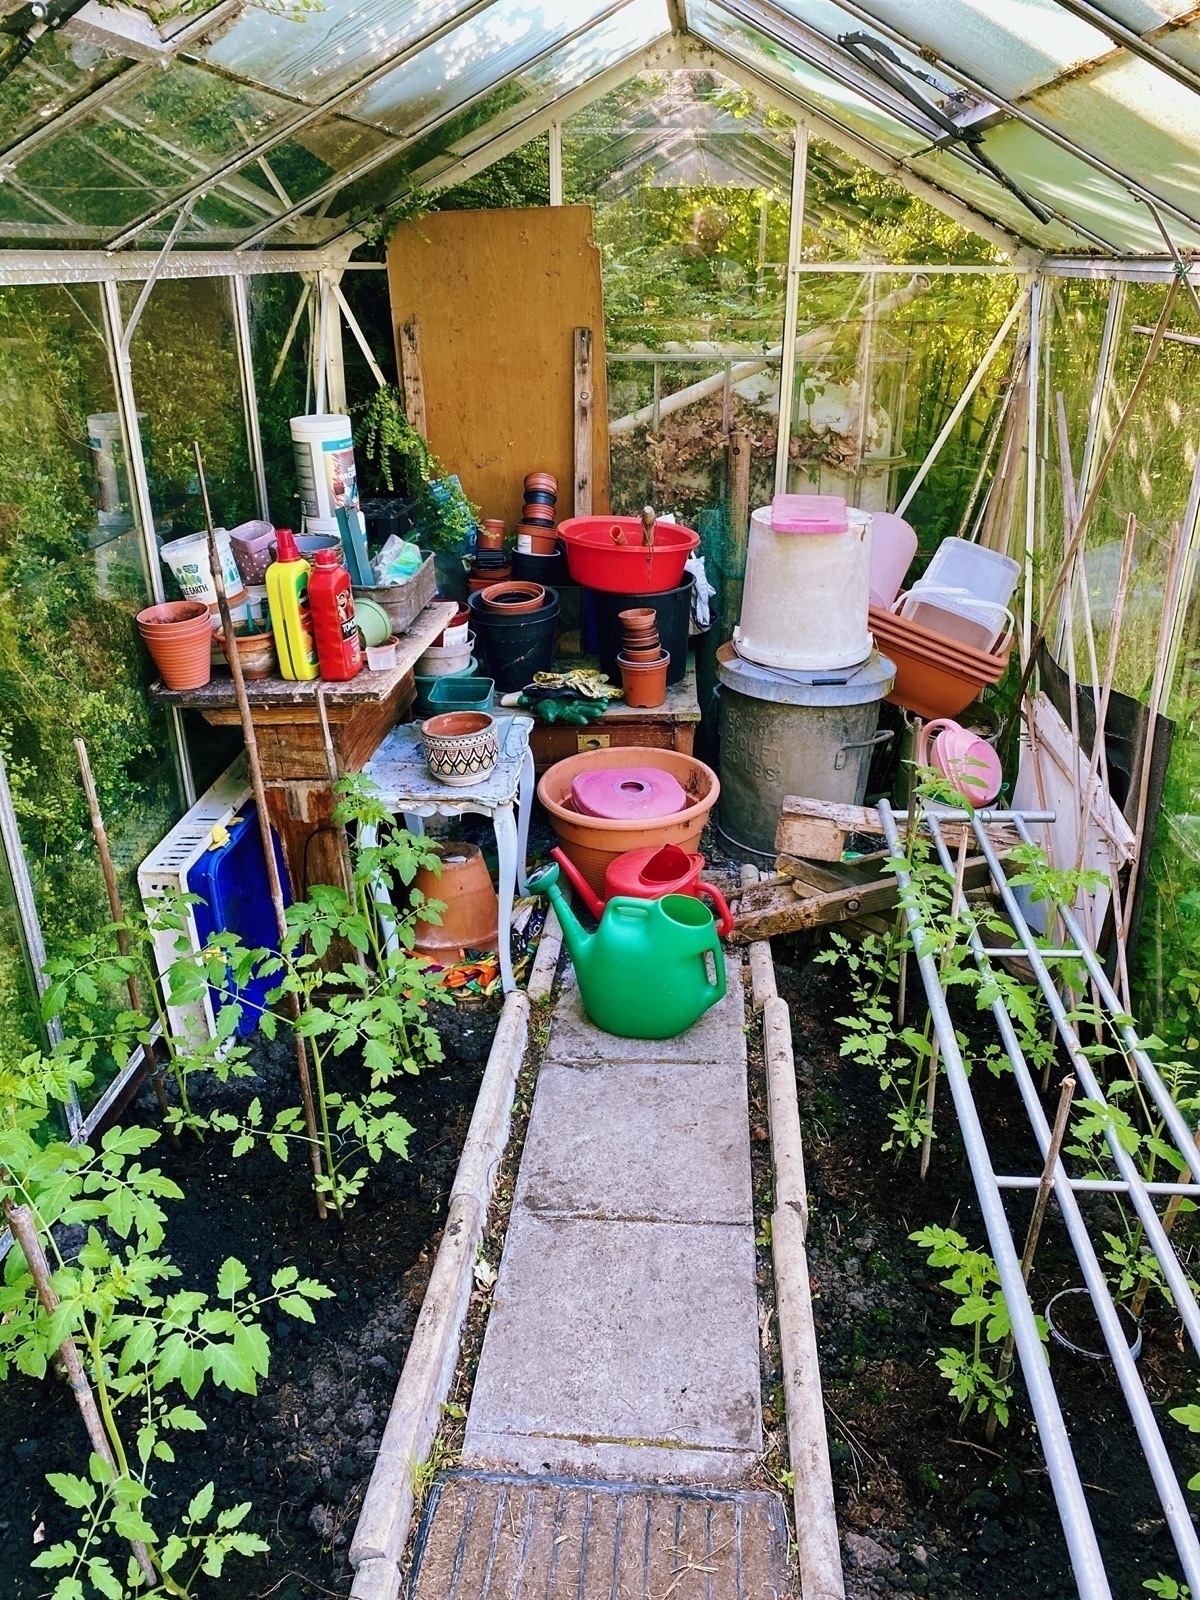 Inside a small untidy greenhouse, young tomato plants growing on either side of central stone path